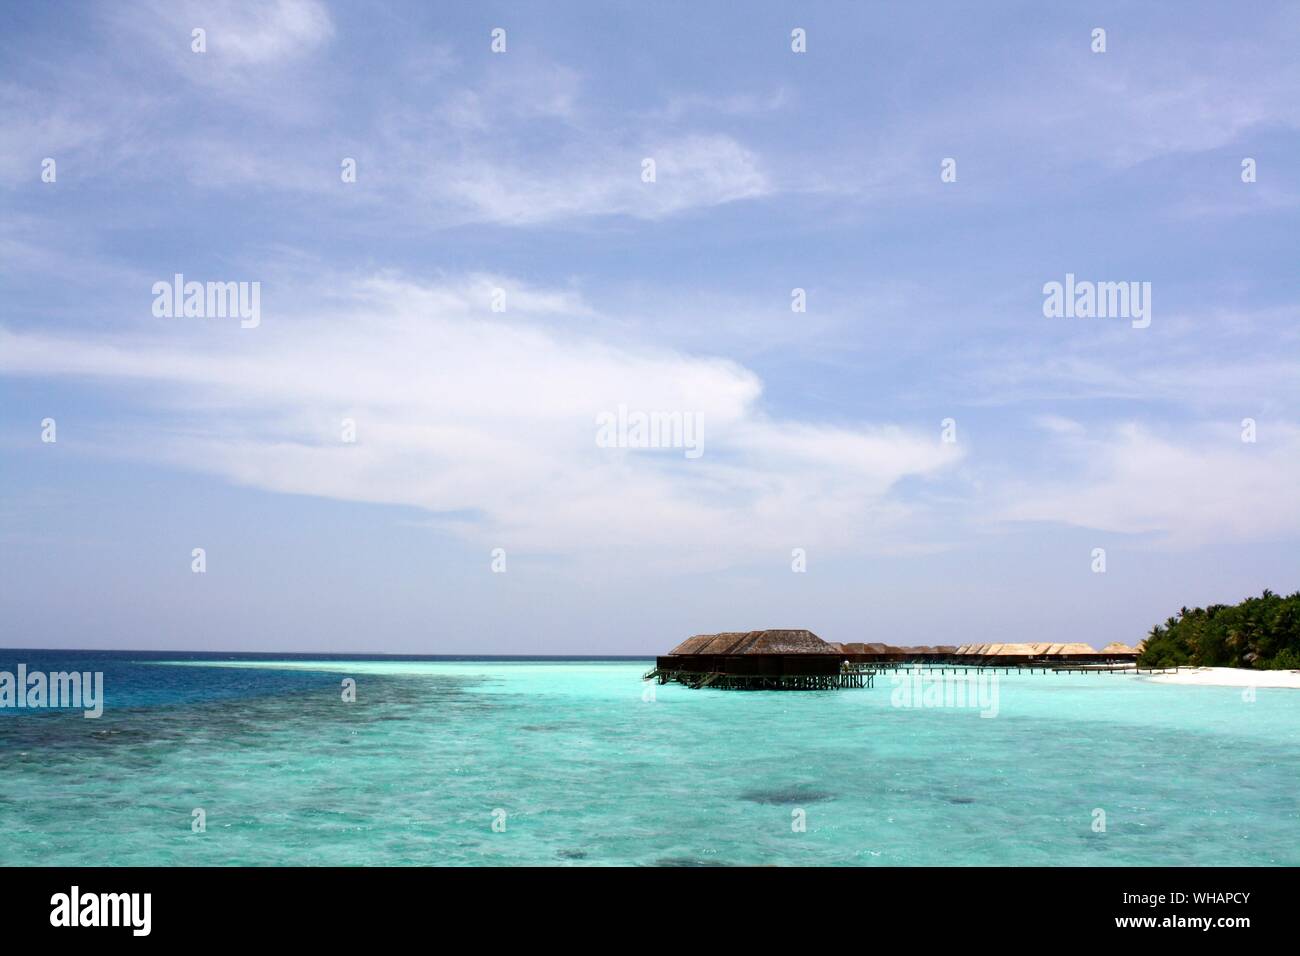 A Thatched Hut On The Edge Of A Tropical Beach Stock Photo